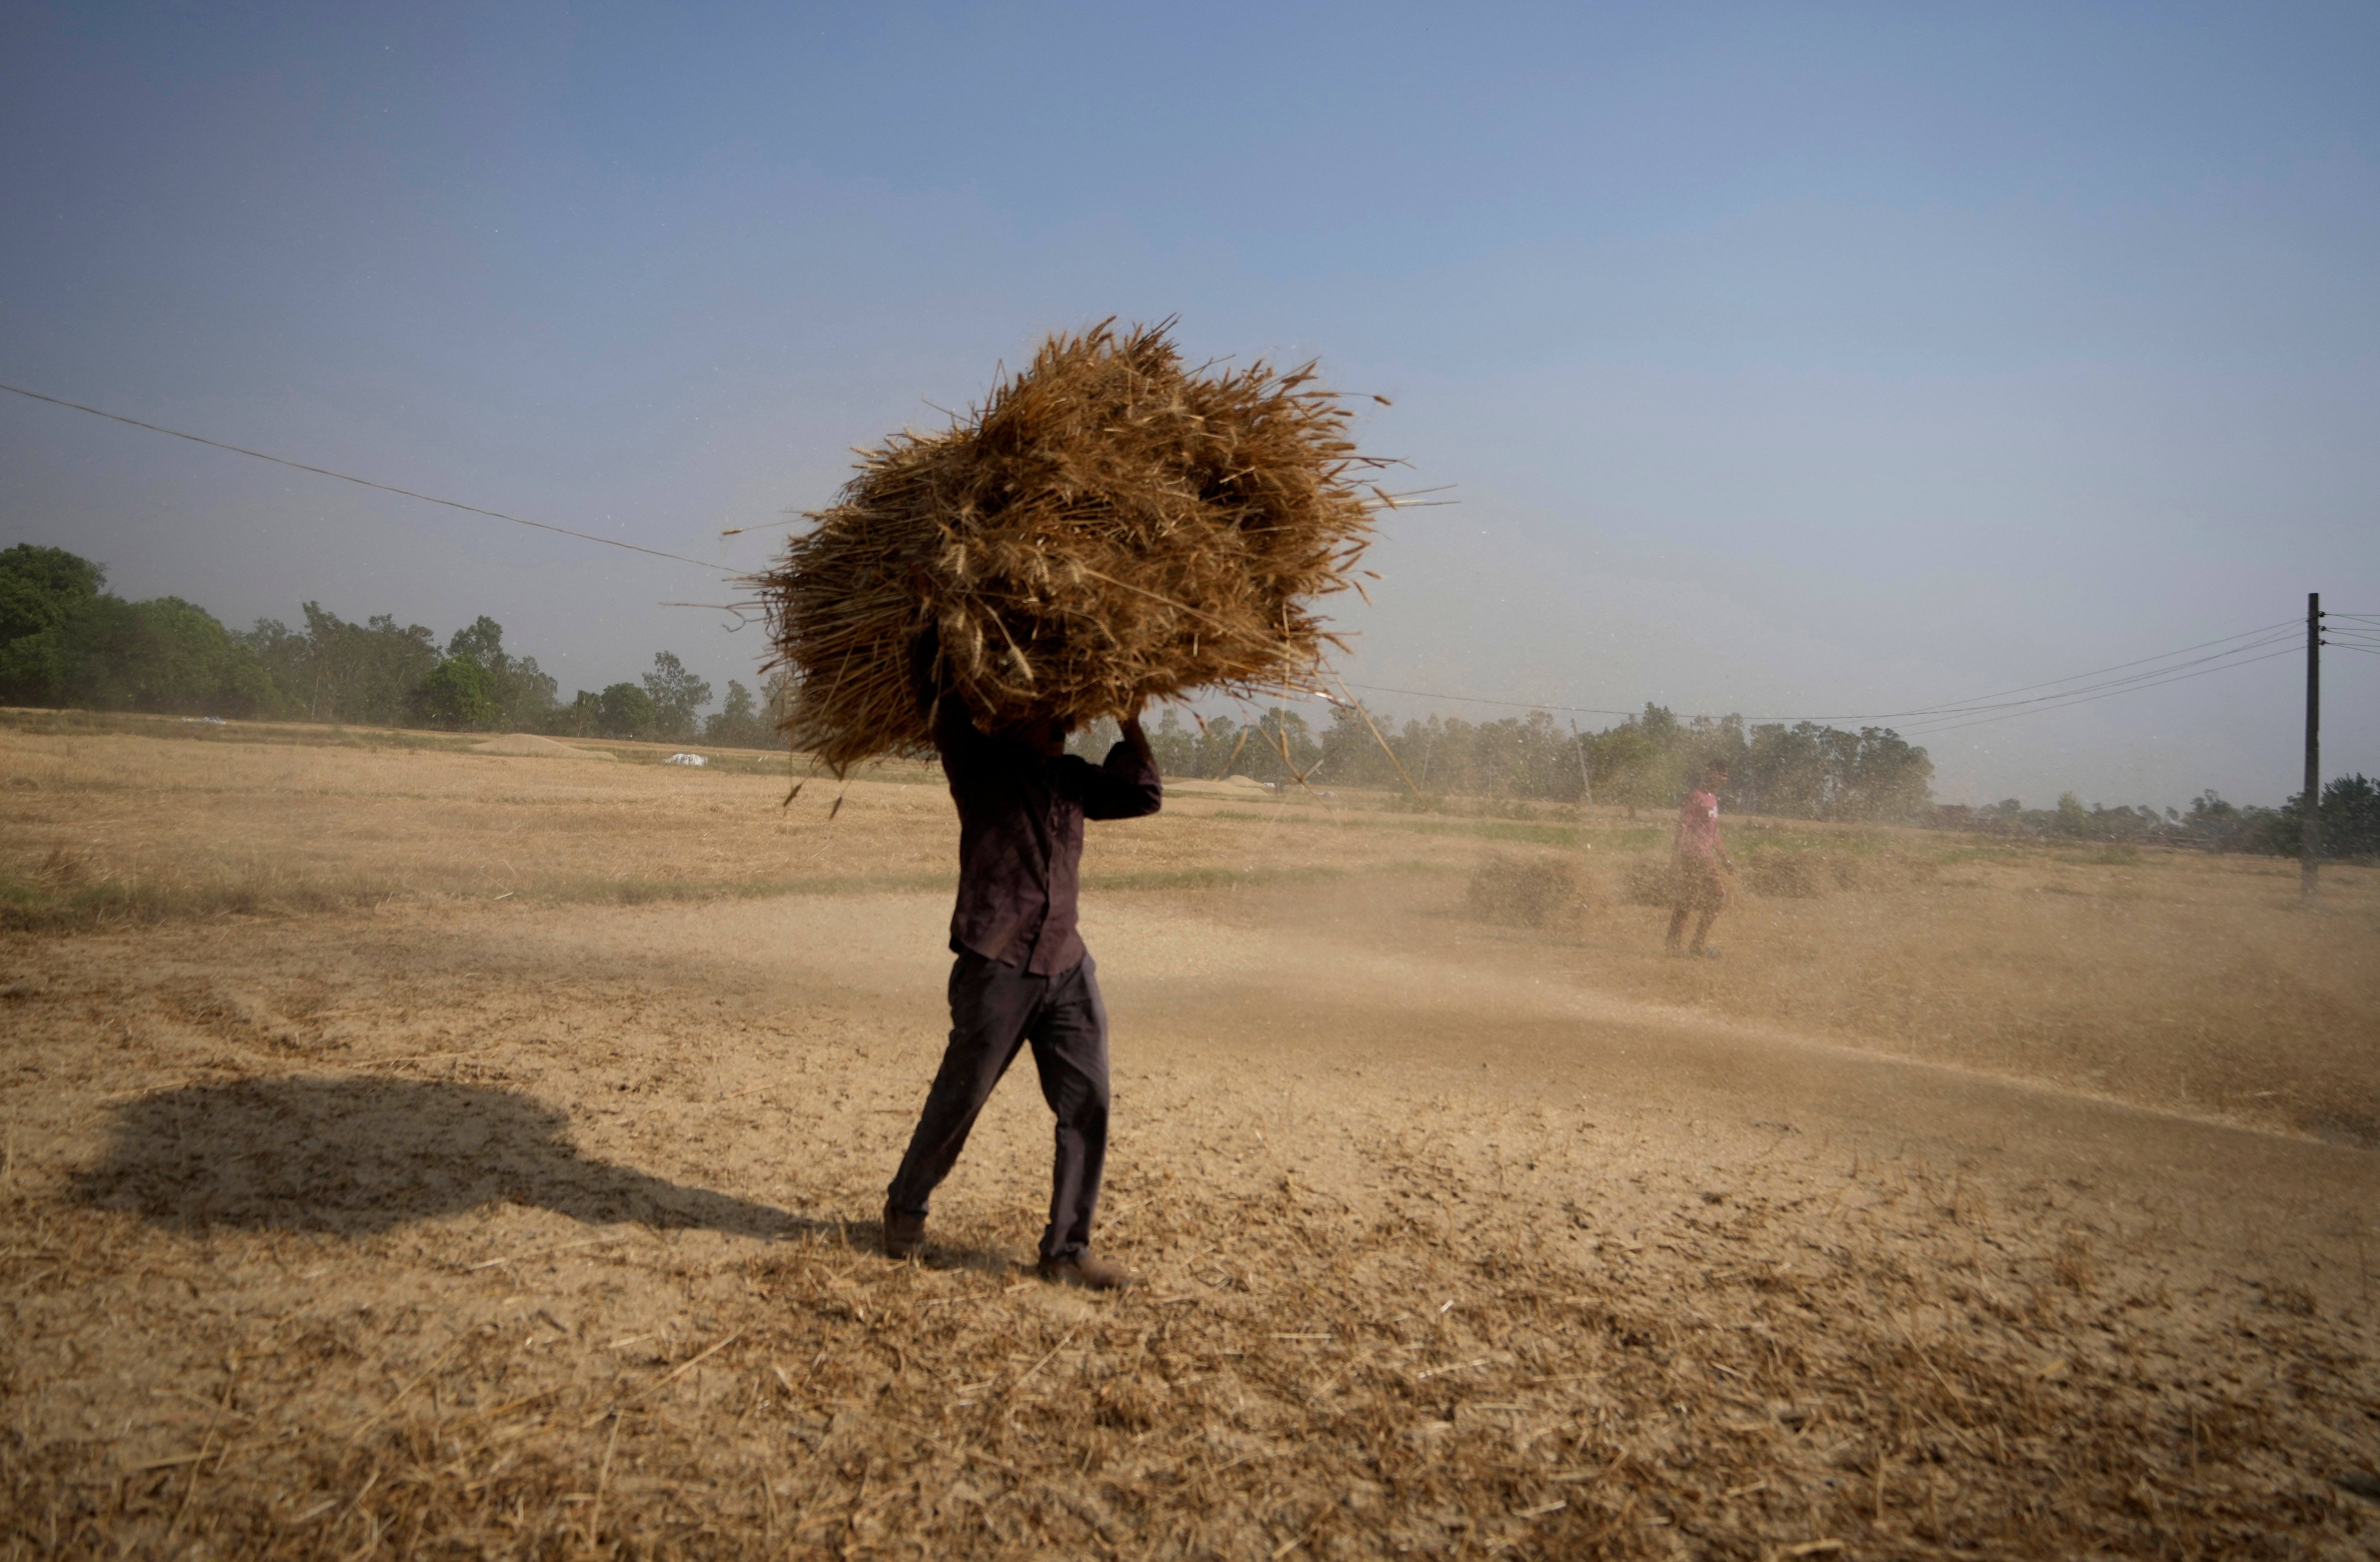 An Indian farmer carries wheat crop harvested from a field on the outskirts of Jammu, India